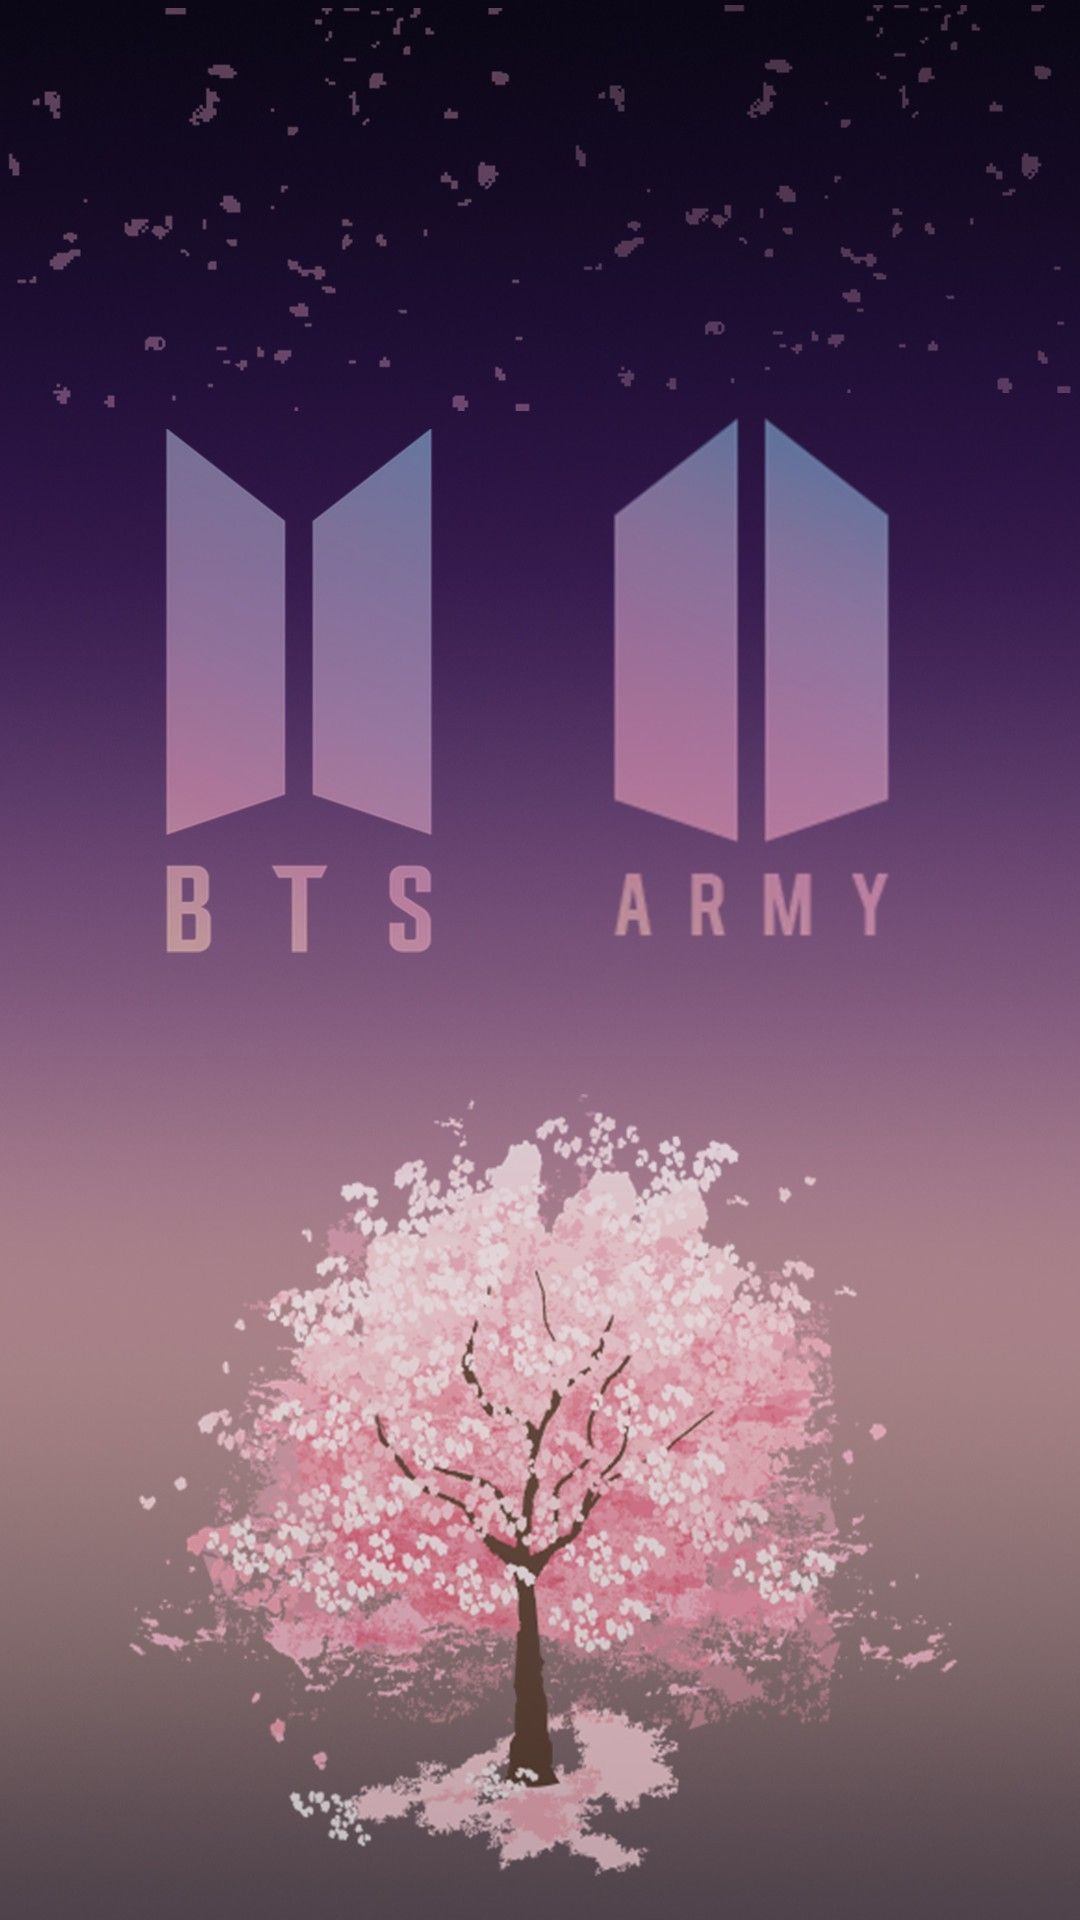 Army BTS Wallpapers - Wallpaper Cave